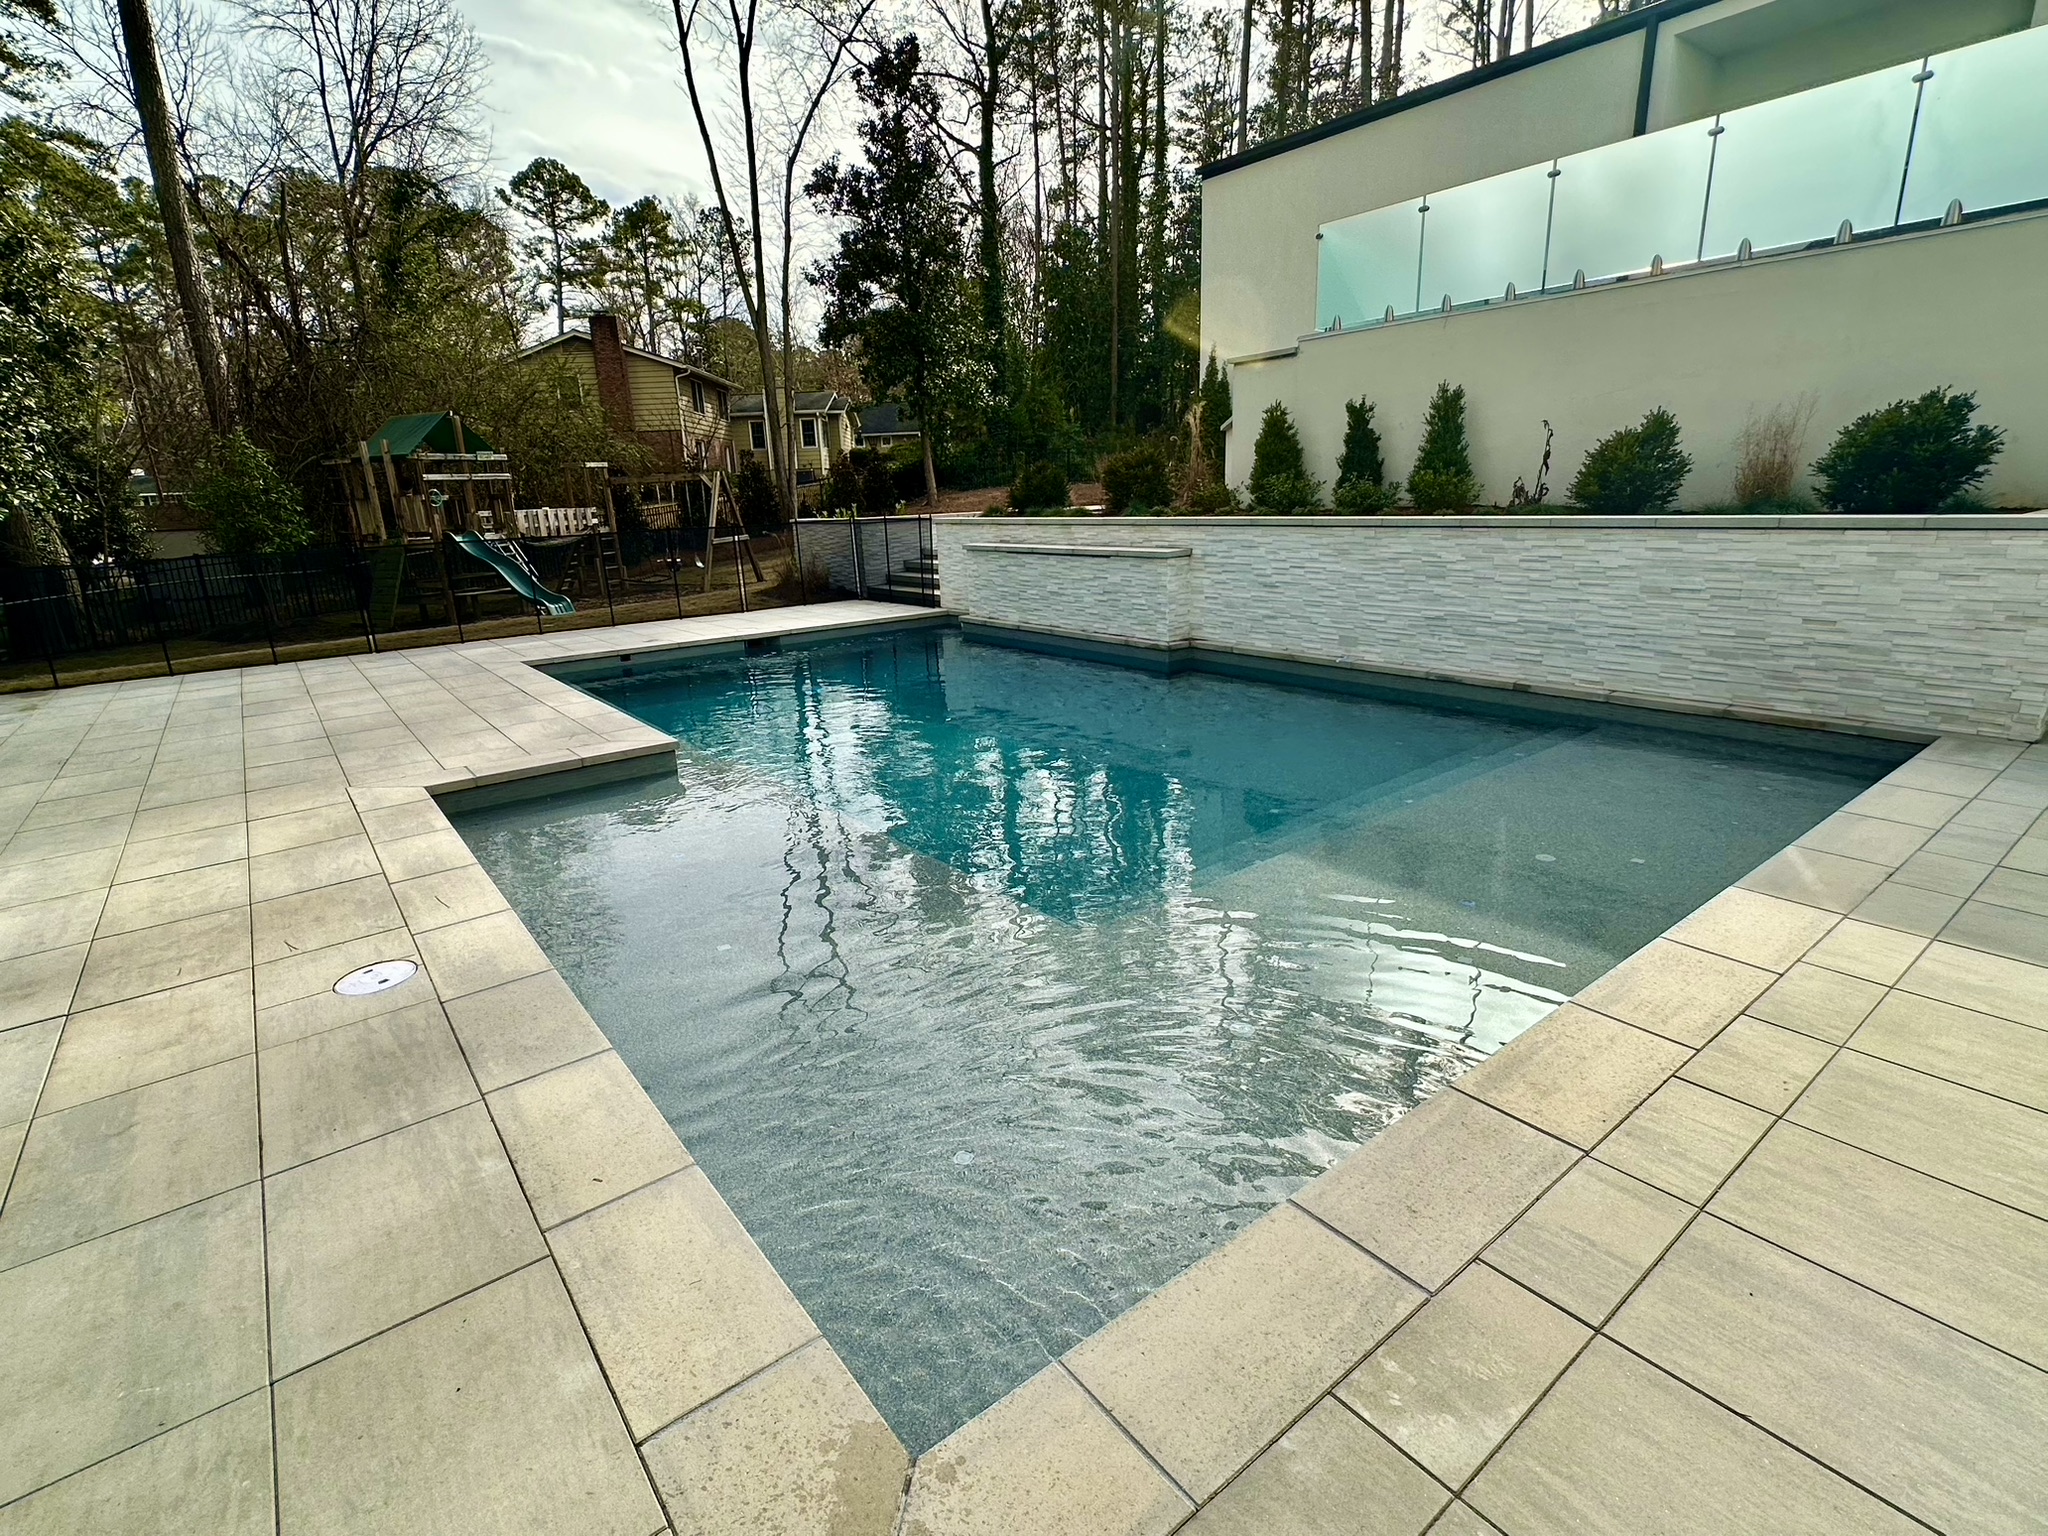 A contemporary straight-line pool surrounded by urban architecture.